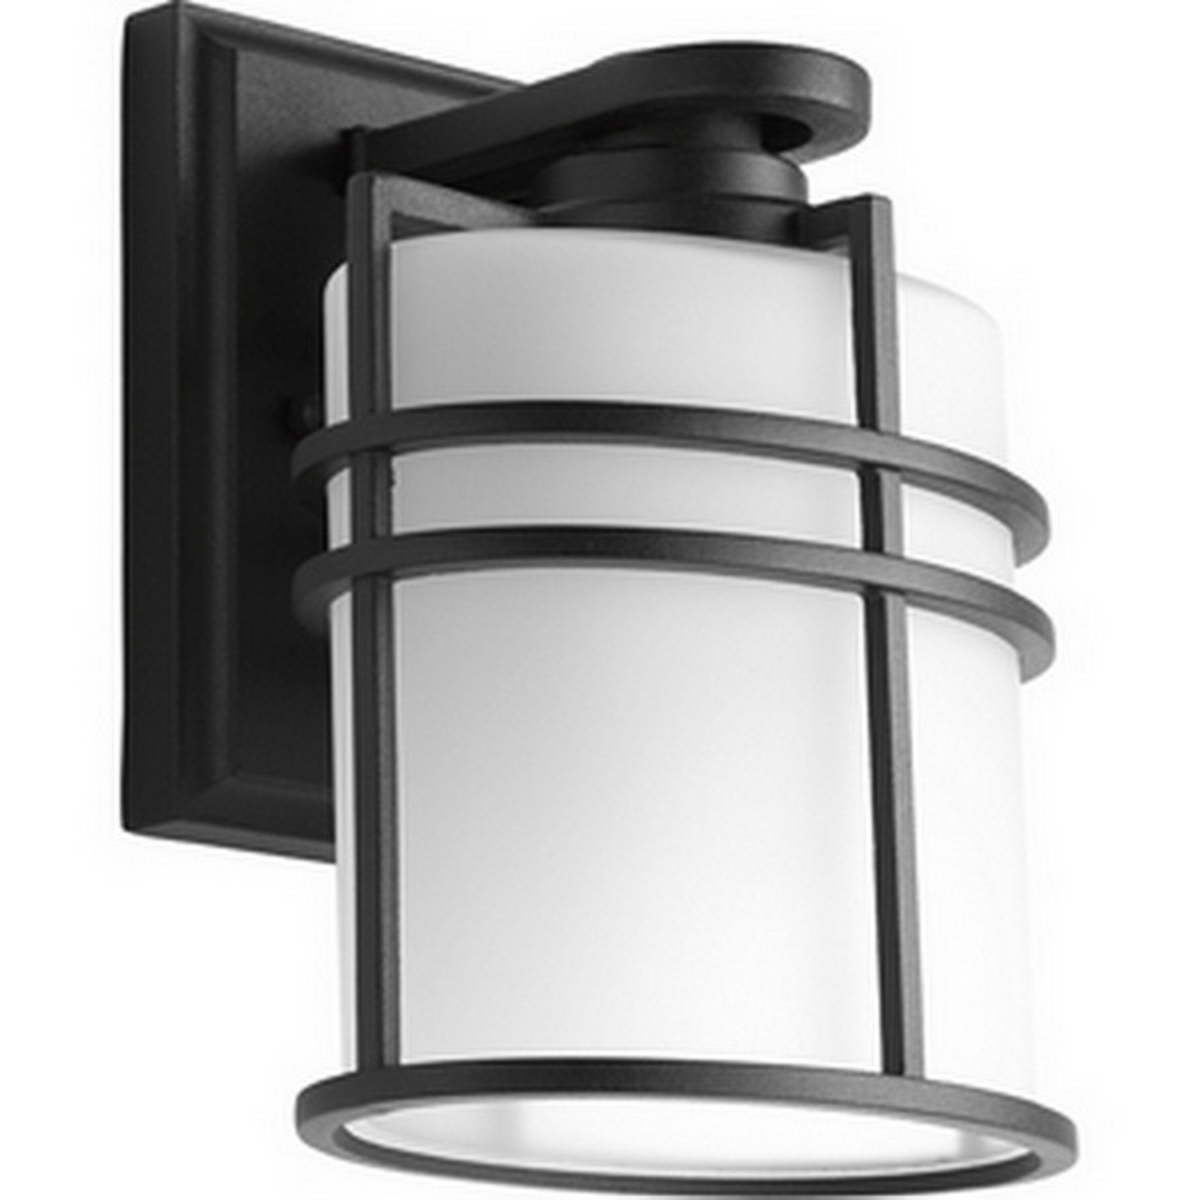 Format 8 in. Outdoor Wall Sconce Black Finish